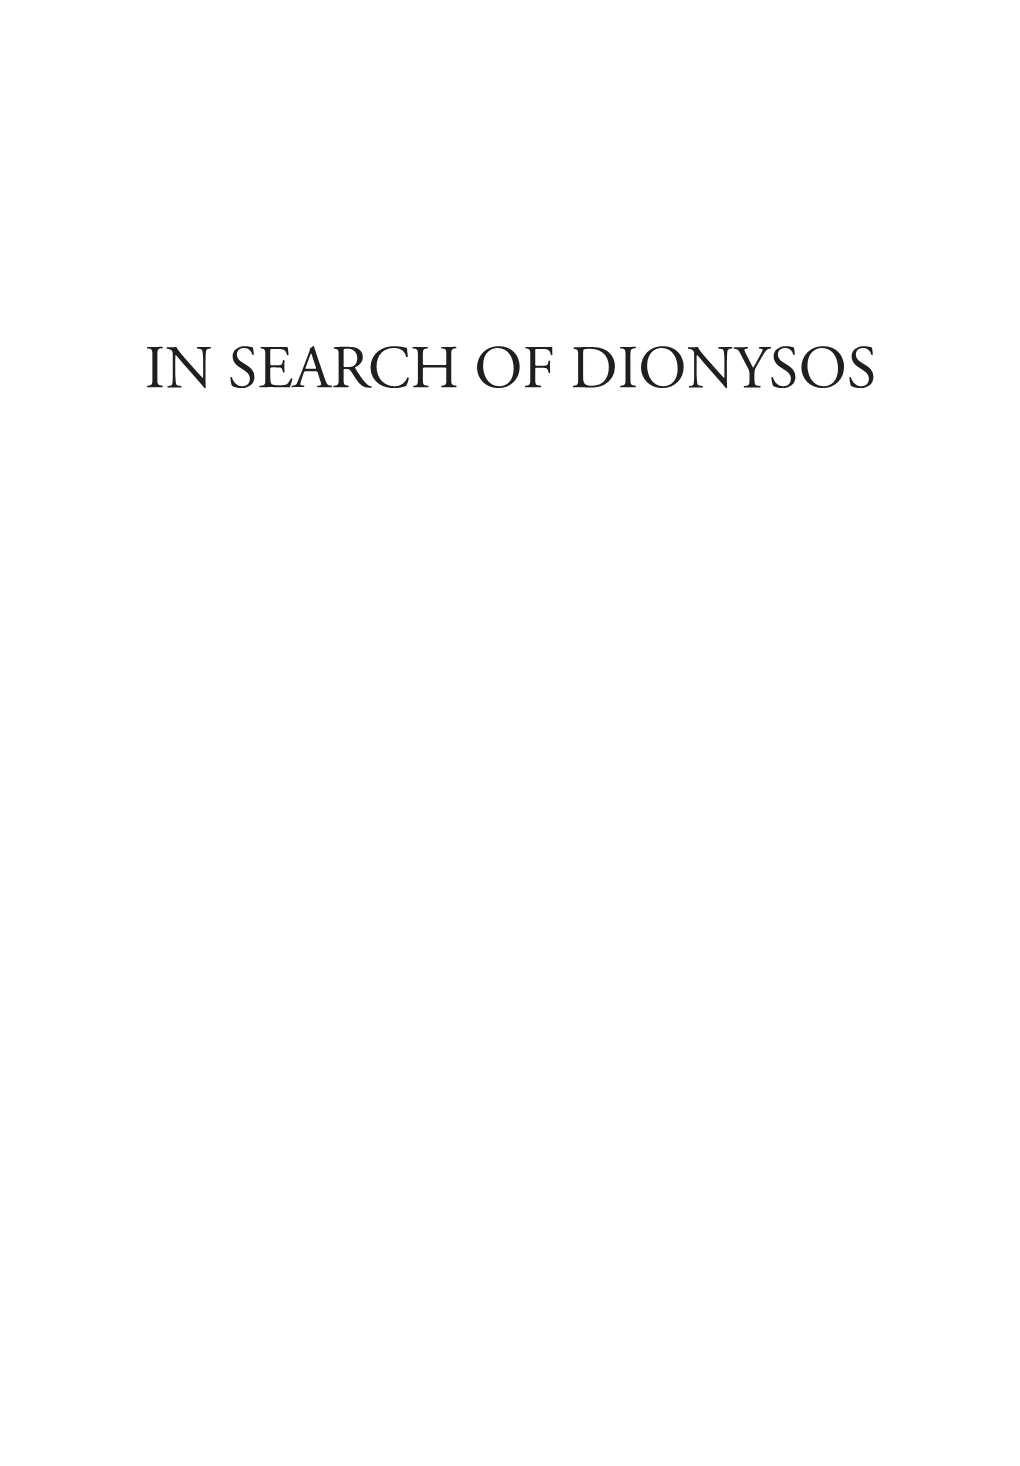 In Search of Dionysos